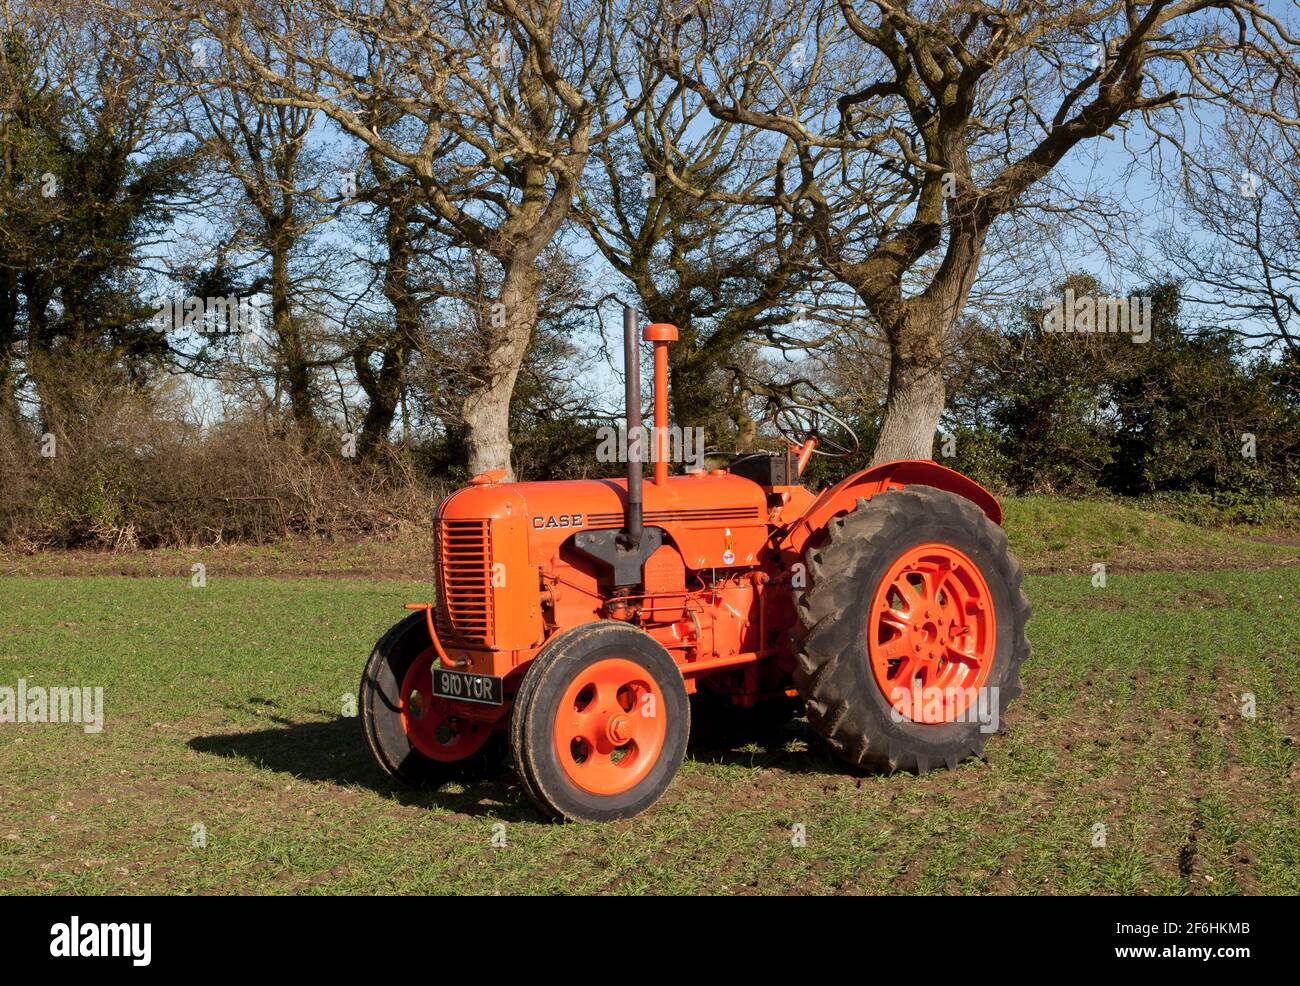 A vintage Case tractor in a field drilled with corn in Spring time Stock Photo